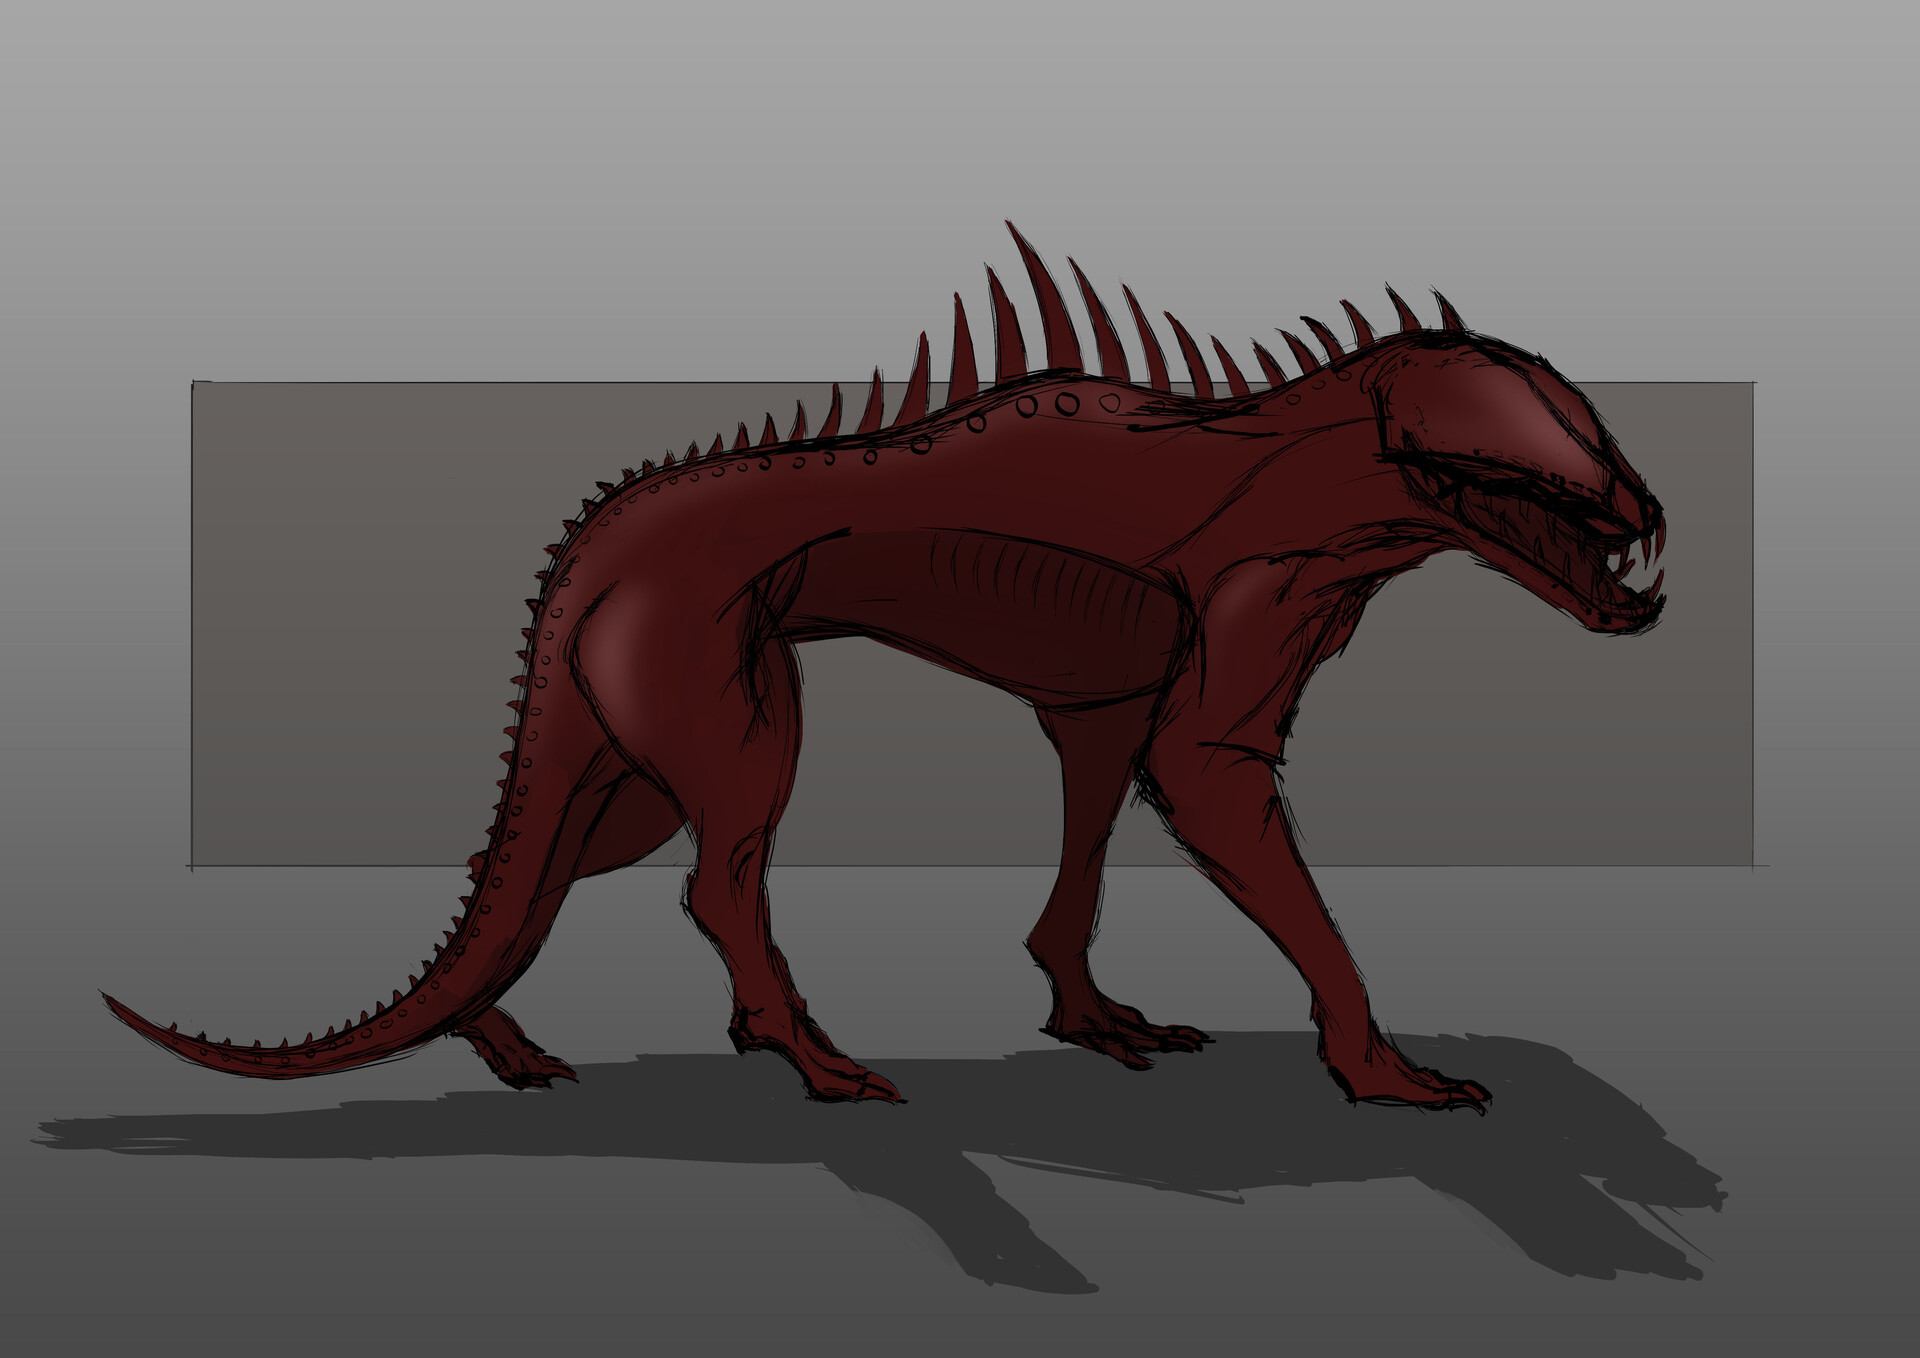 A fresh take on an old classic: SCP - 939 Redesign